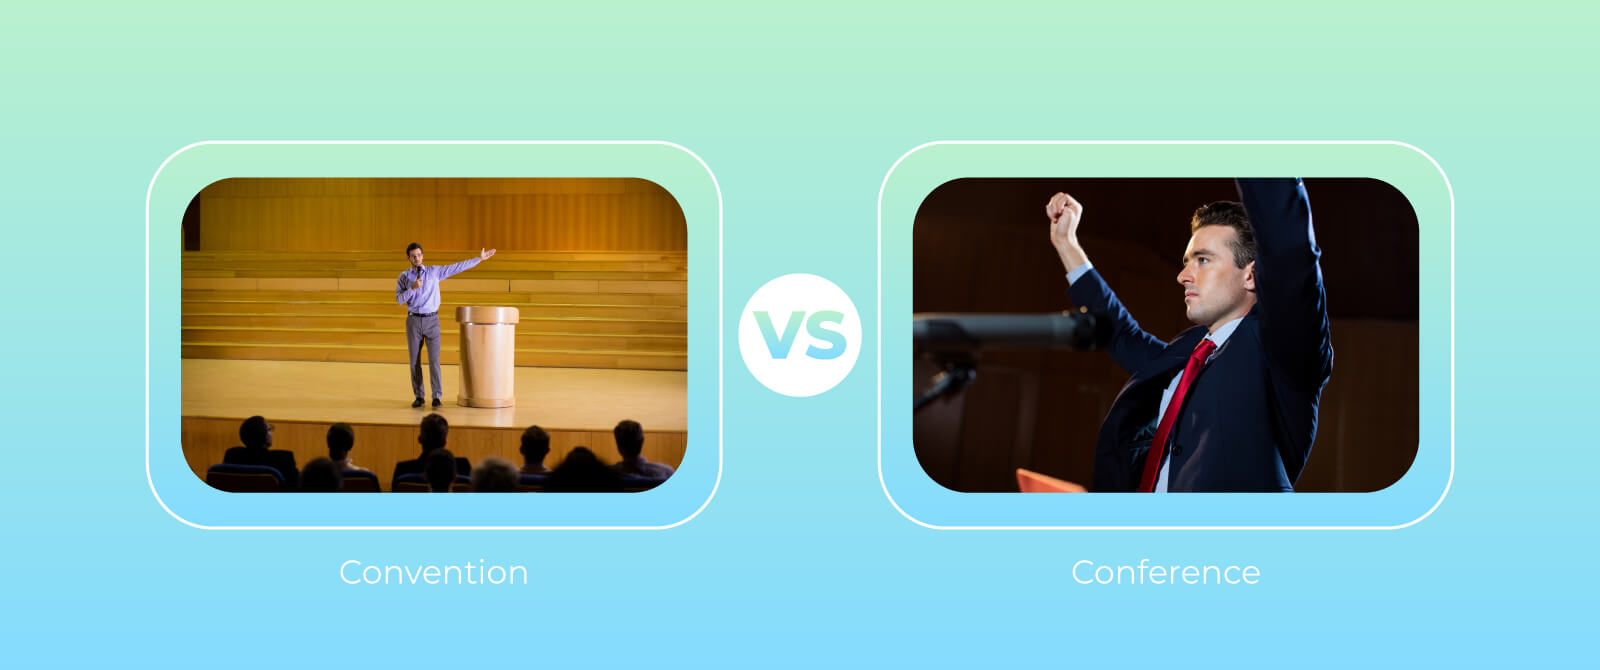 Convention vs Conference: Which Event Fits Your Needs?